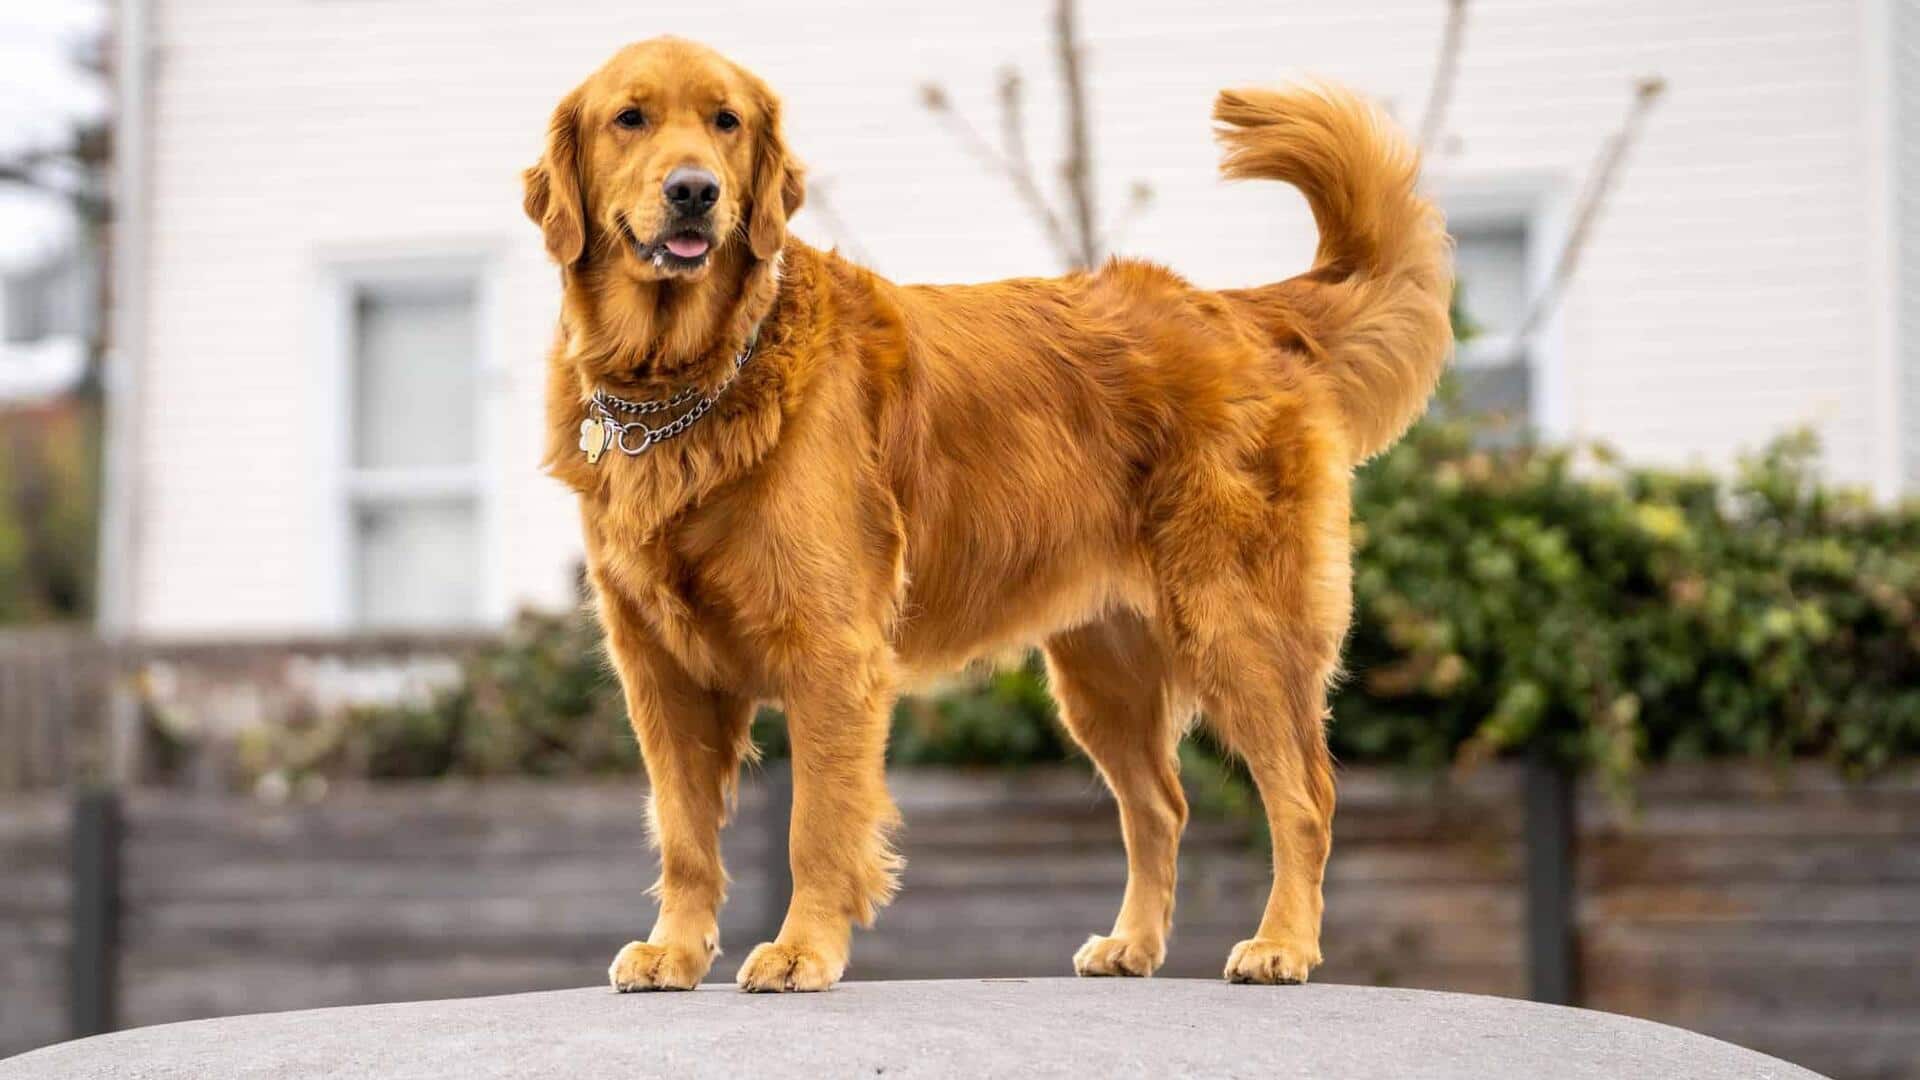 Joint ventures: How to ensure your Golden Retriever's joint health